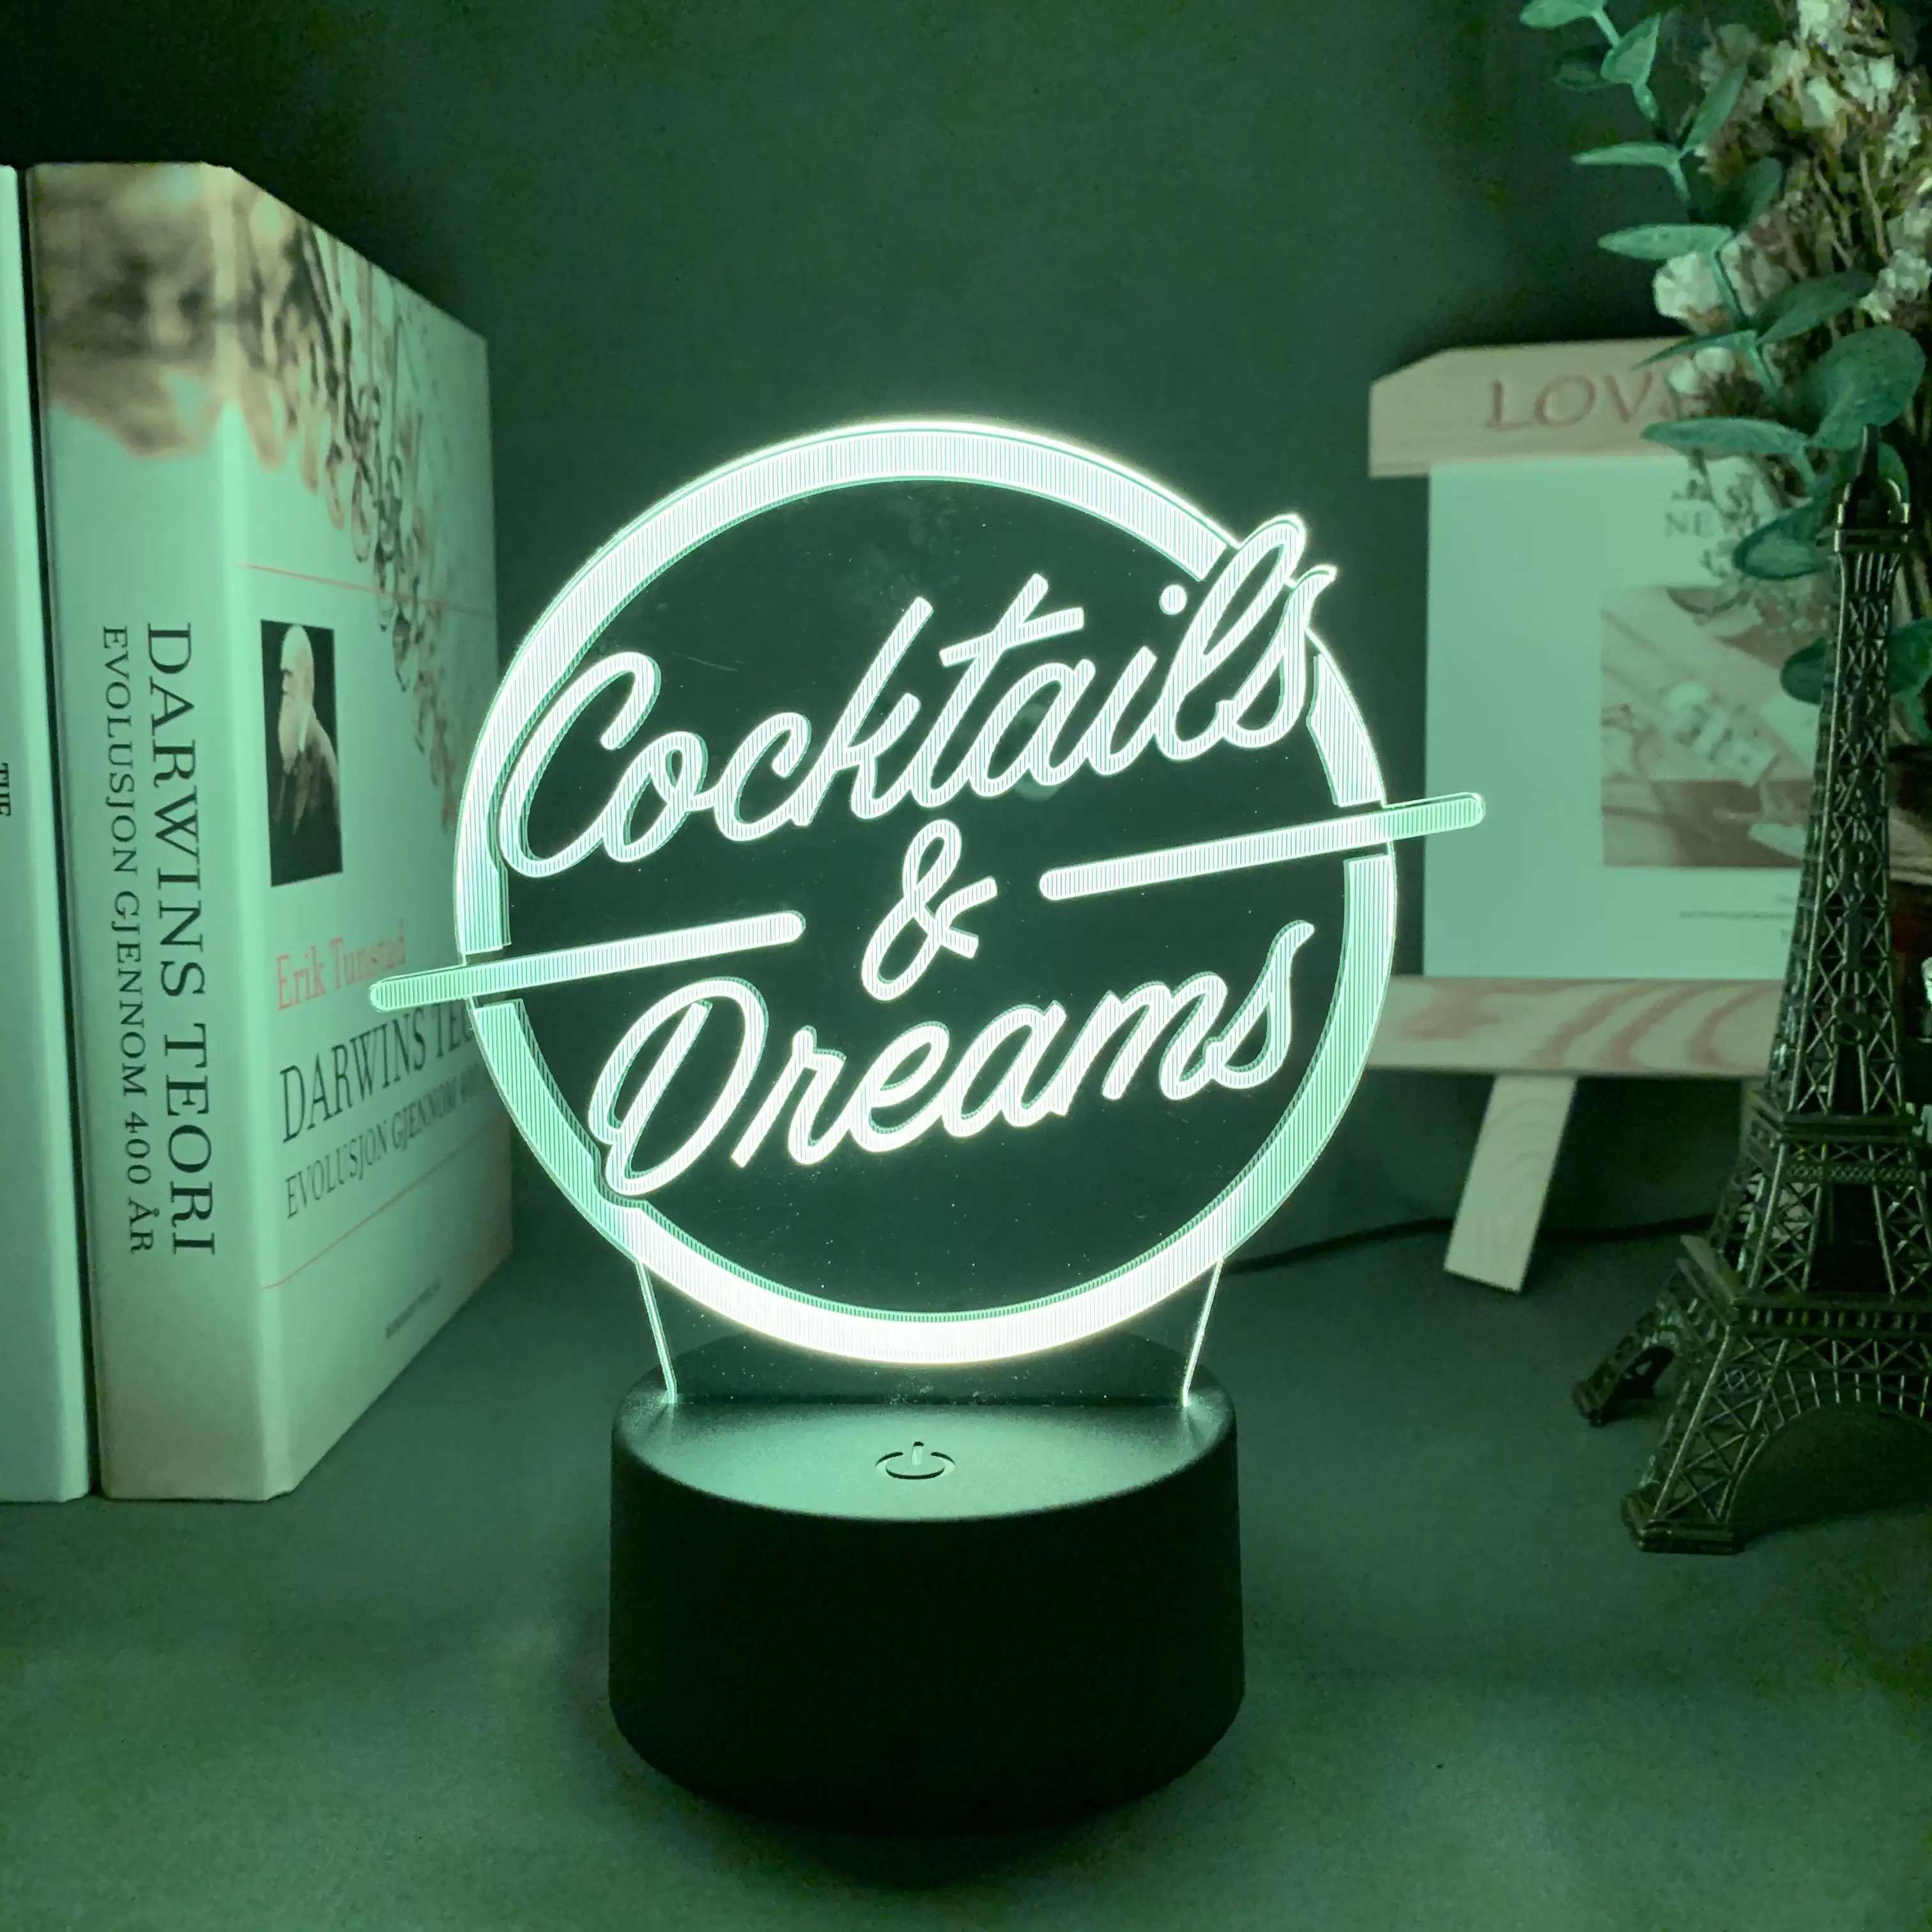 Cocktails & Dreams Led Night Light Sign for Bar Decoration Acrylic Laser Engraving Usb Battery Powered Table Lamp Color Changing cool night lights